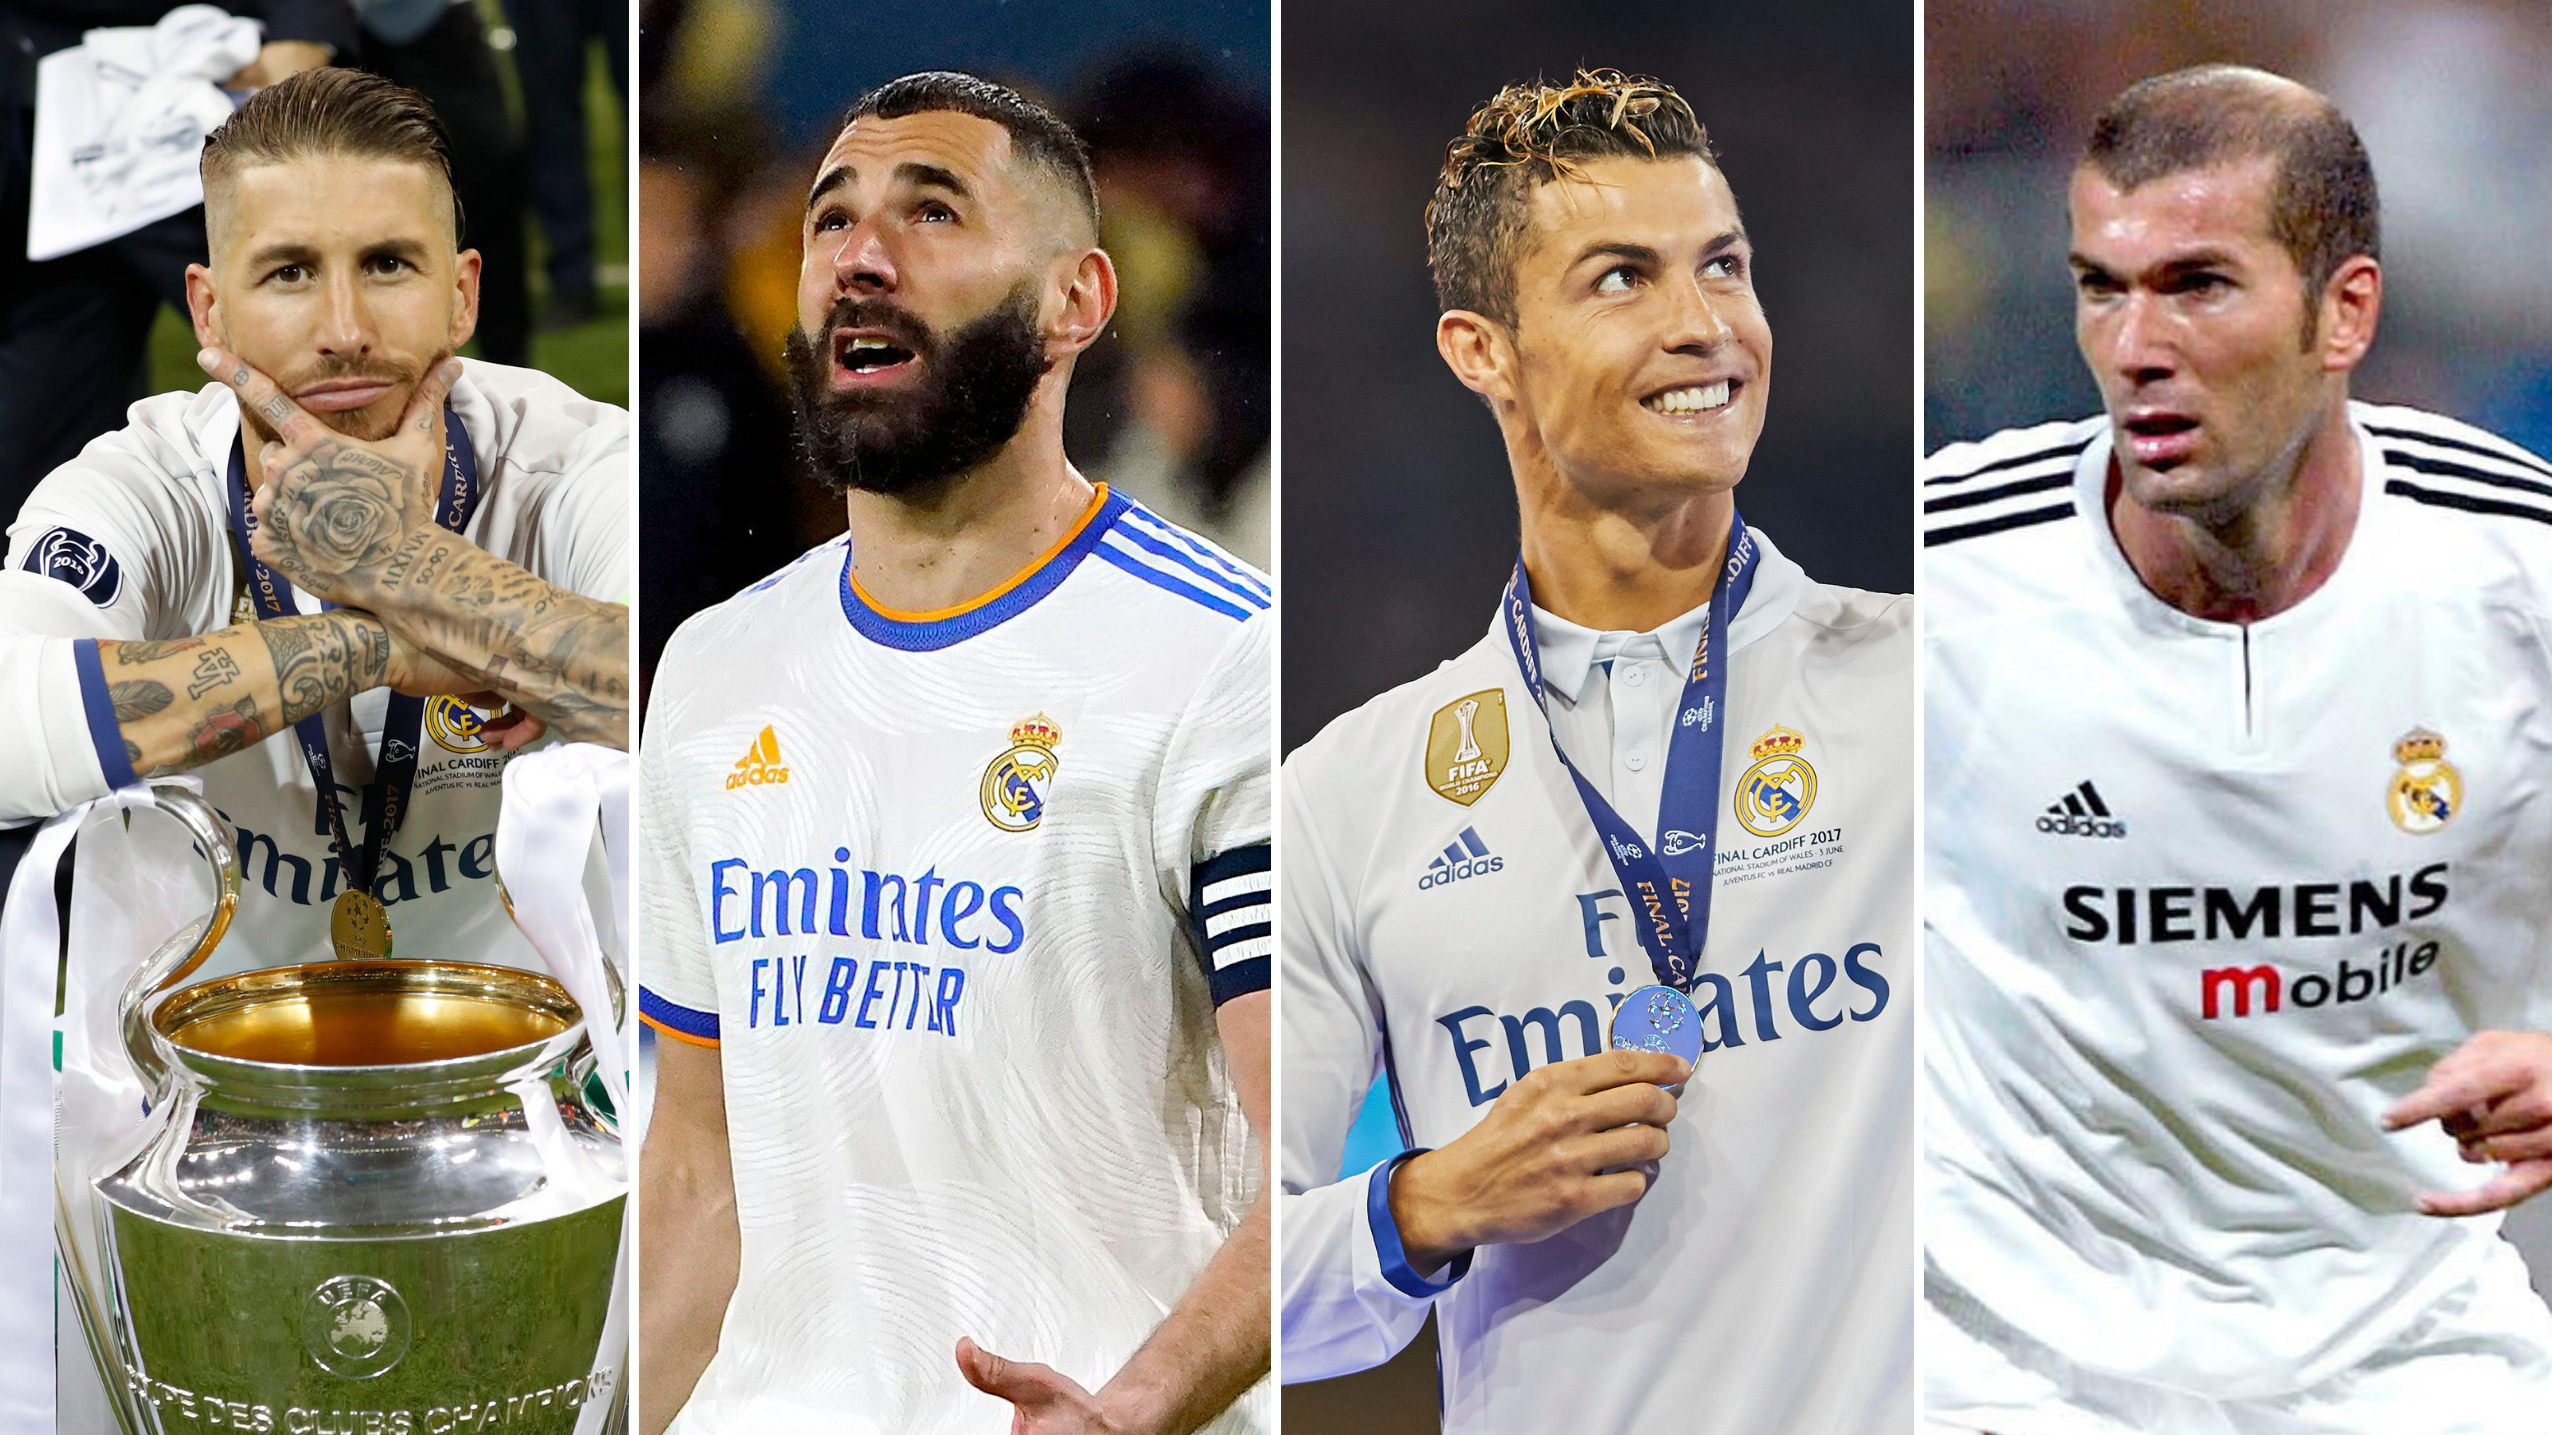 Why Don't Real Madrid Produce Any Great Players? 